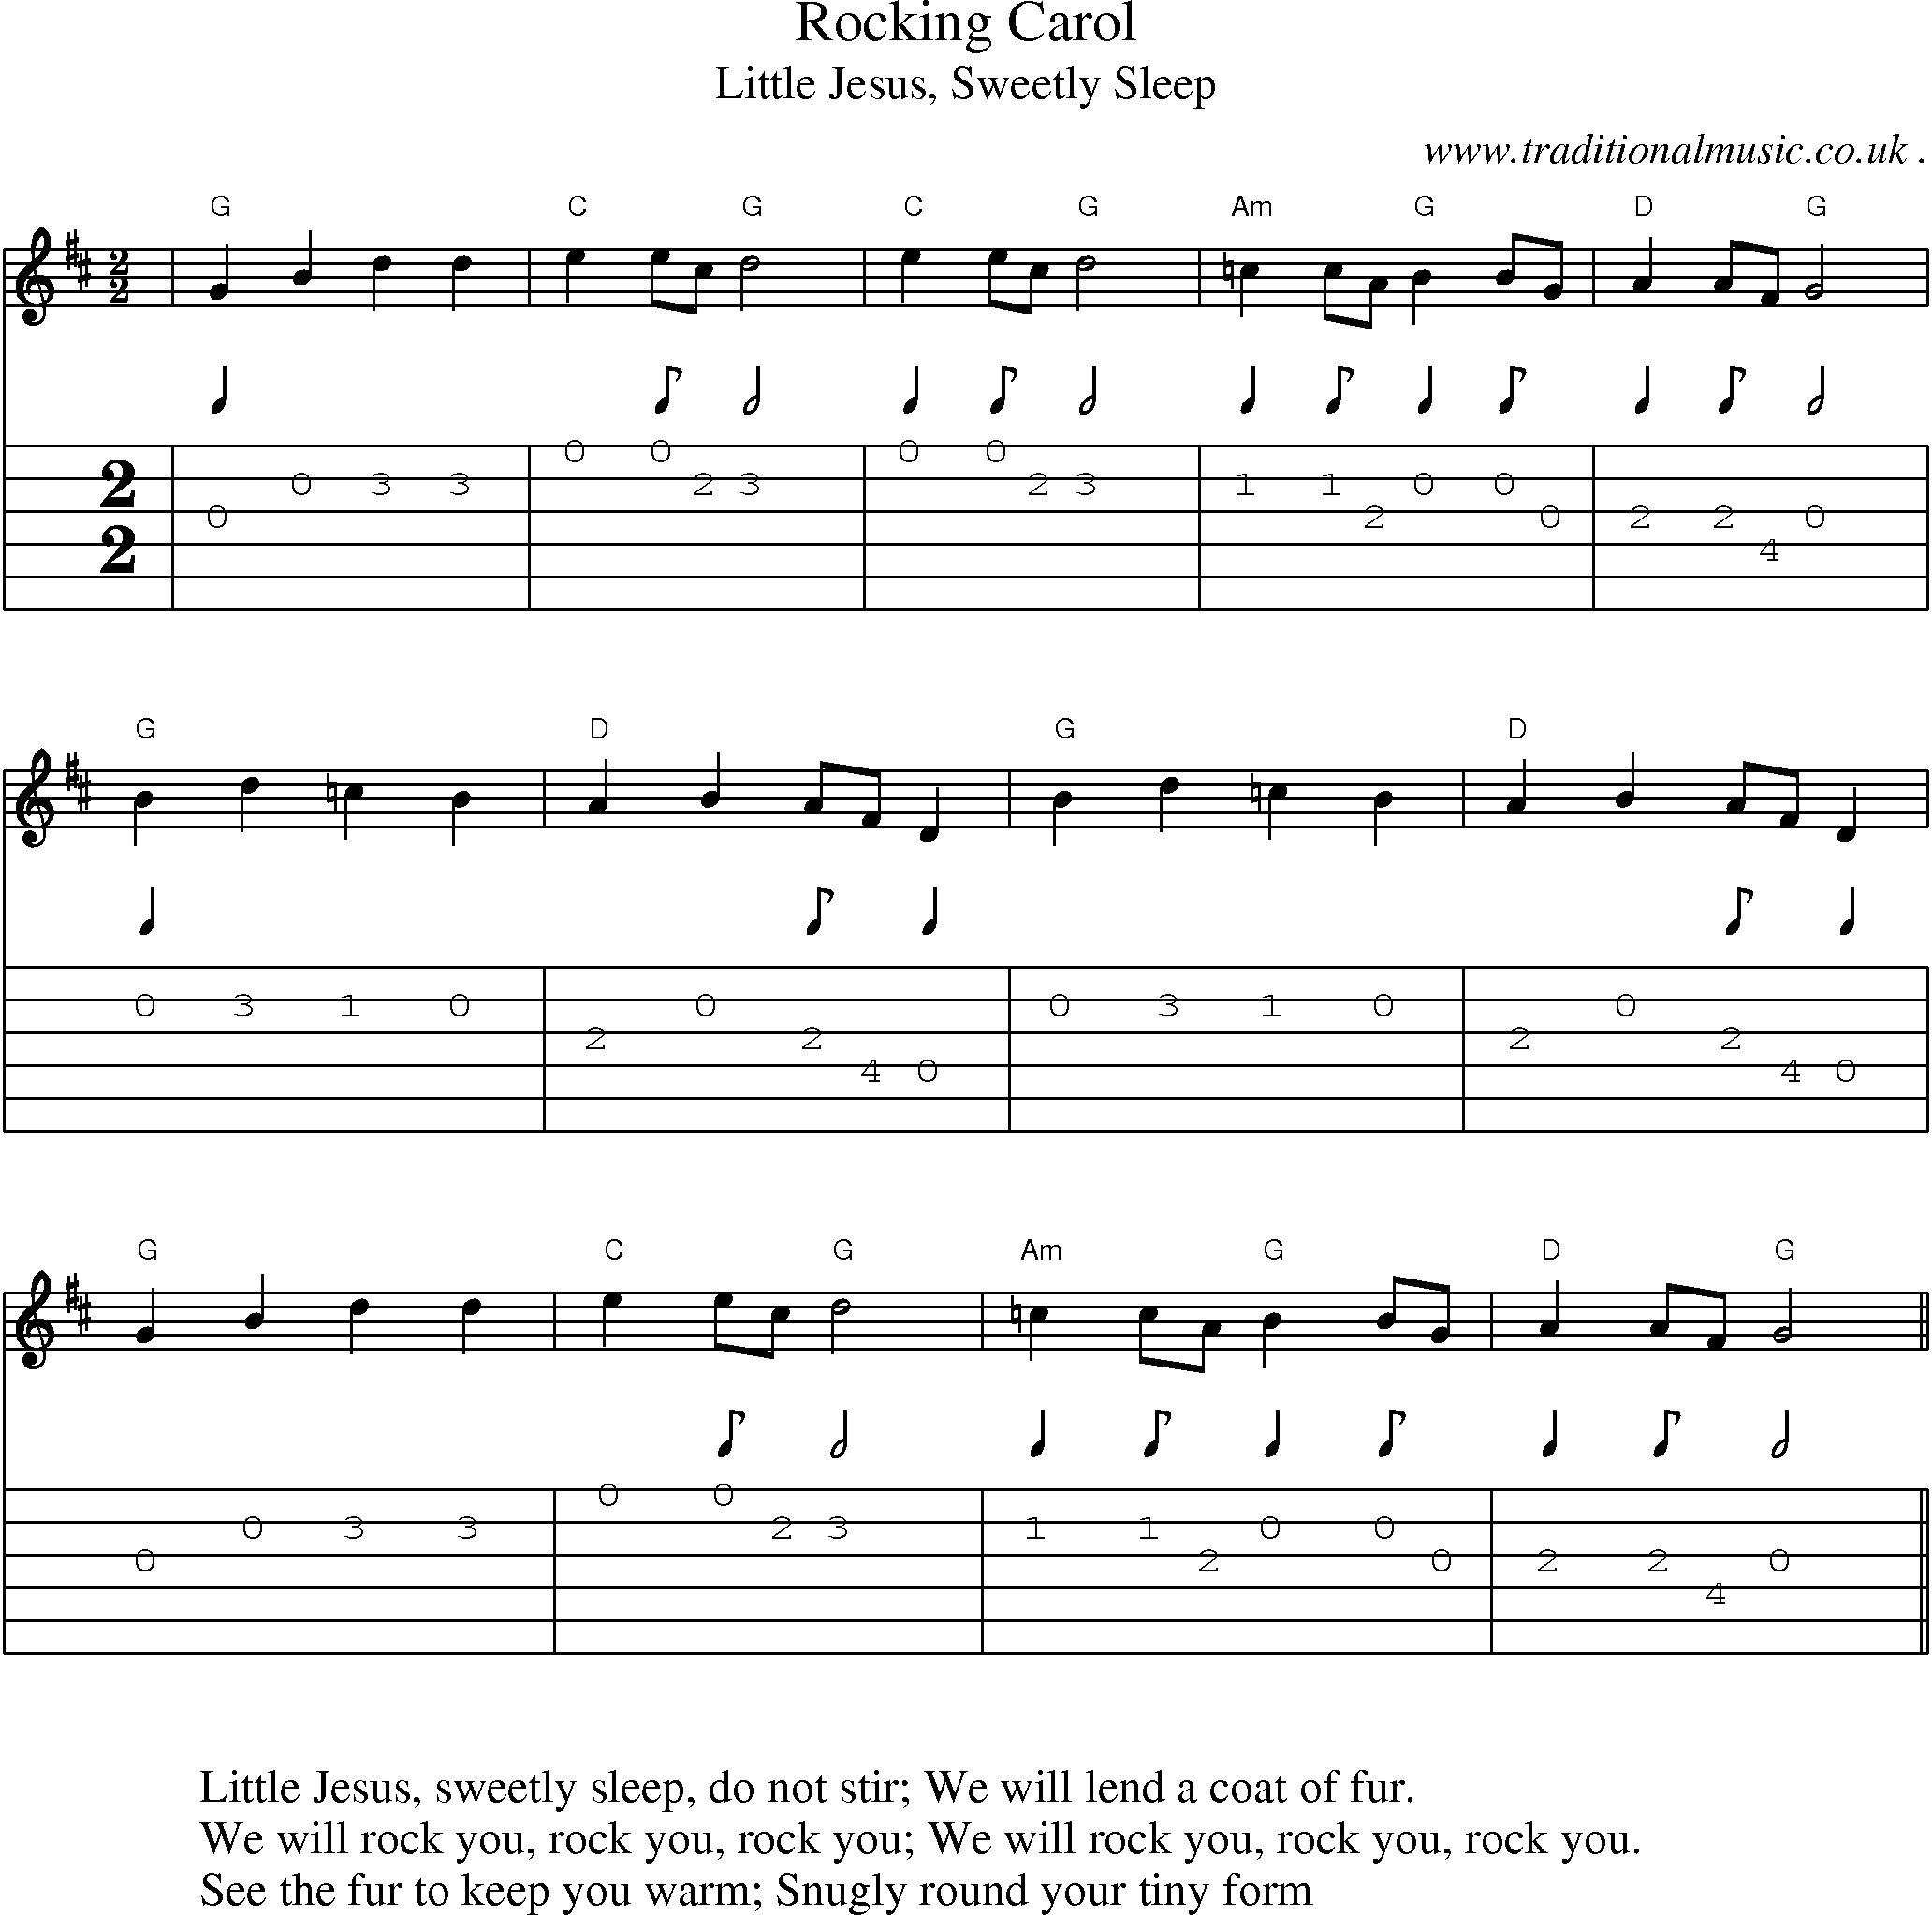 Music Score and Guitar Tabs for Rocking Carol